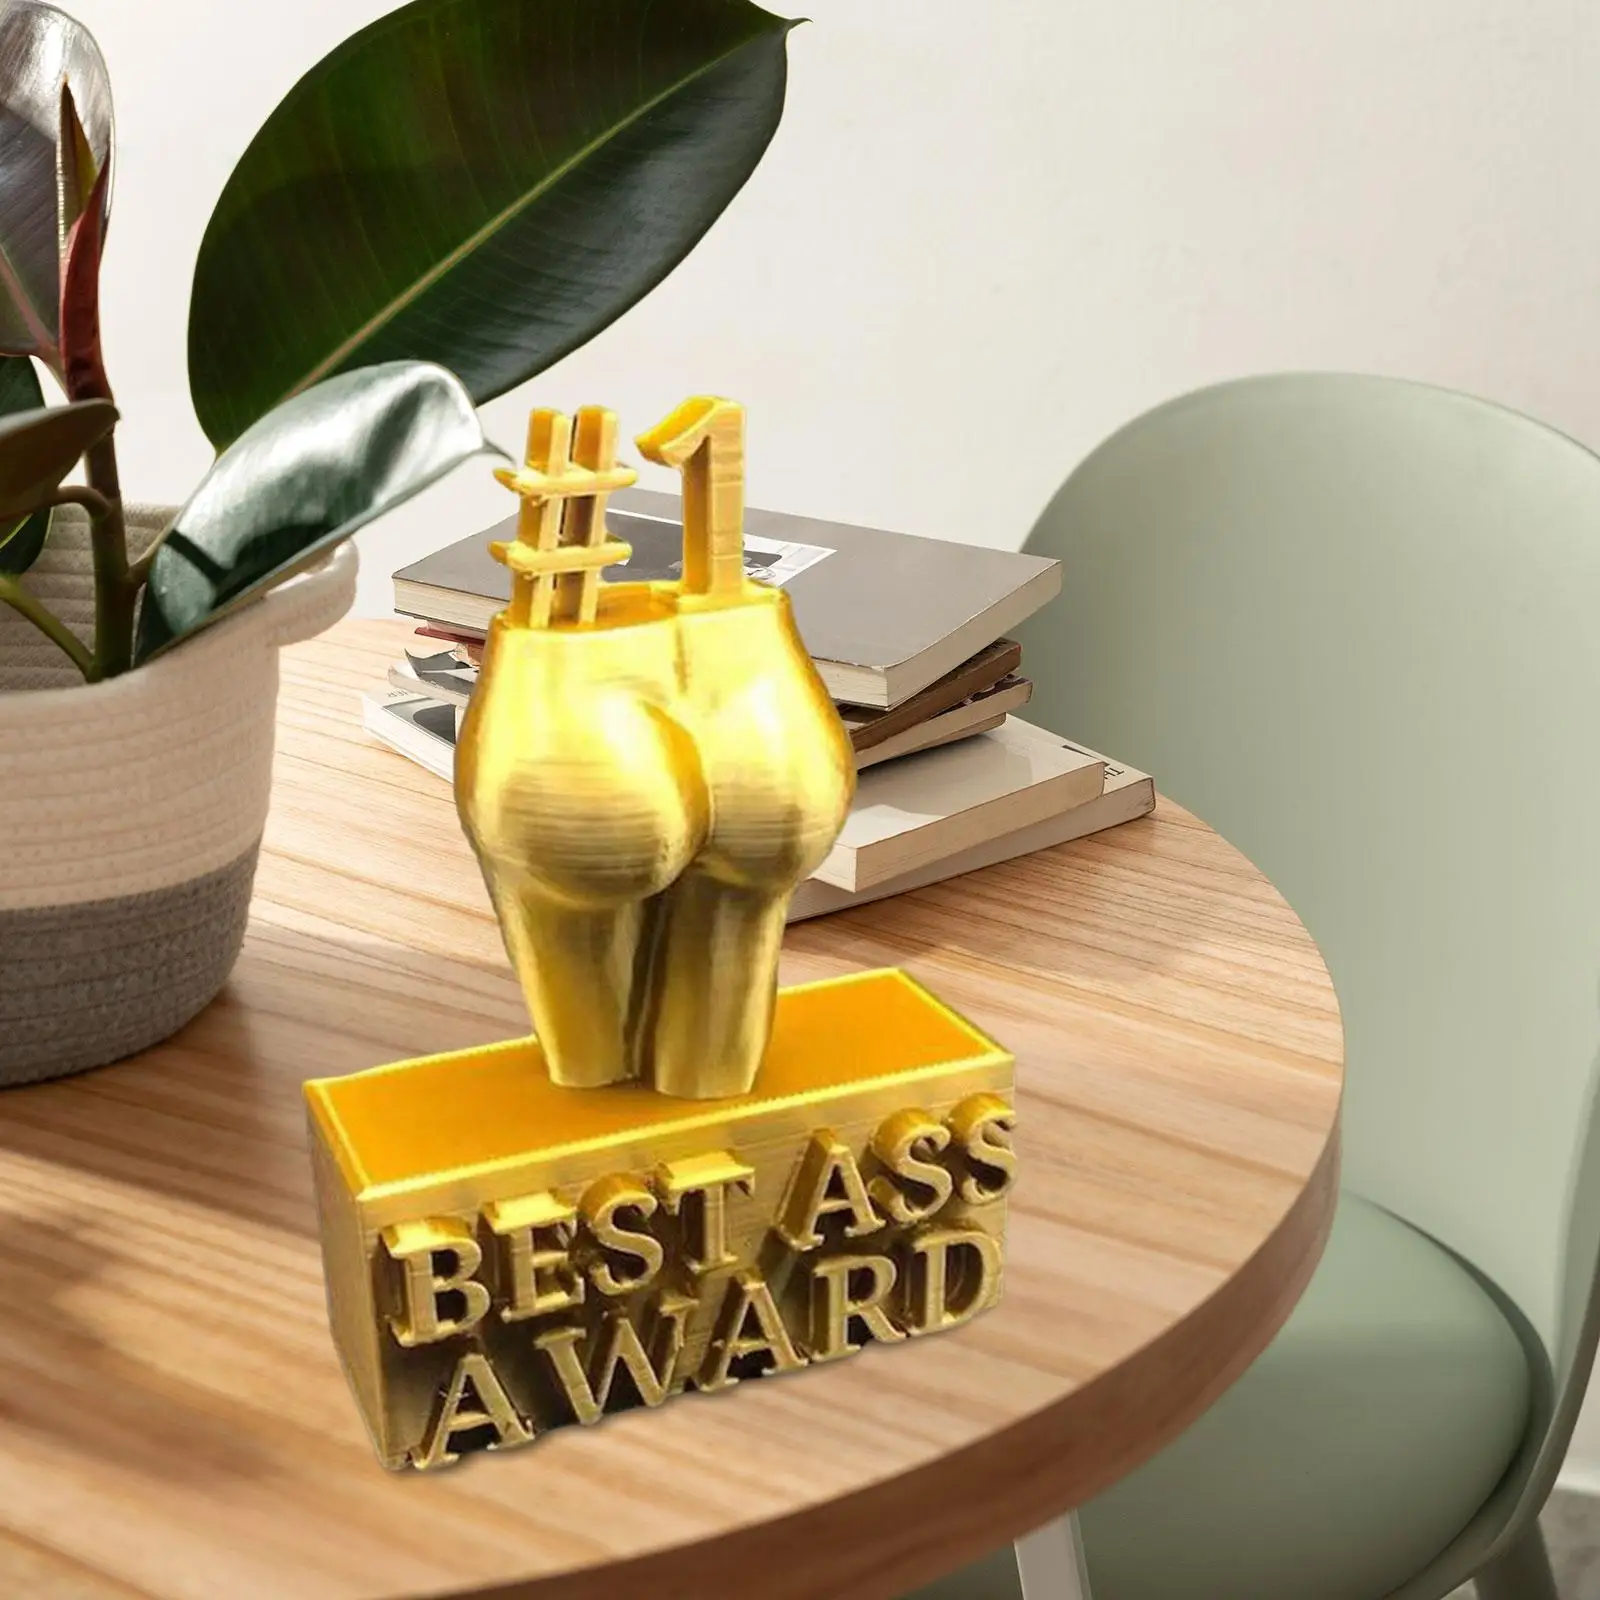 Best Ass Award Desktop Trophy Award Award Gift Creative Trophy for Competitions Celebrations Ceremonies Party Appreciation